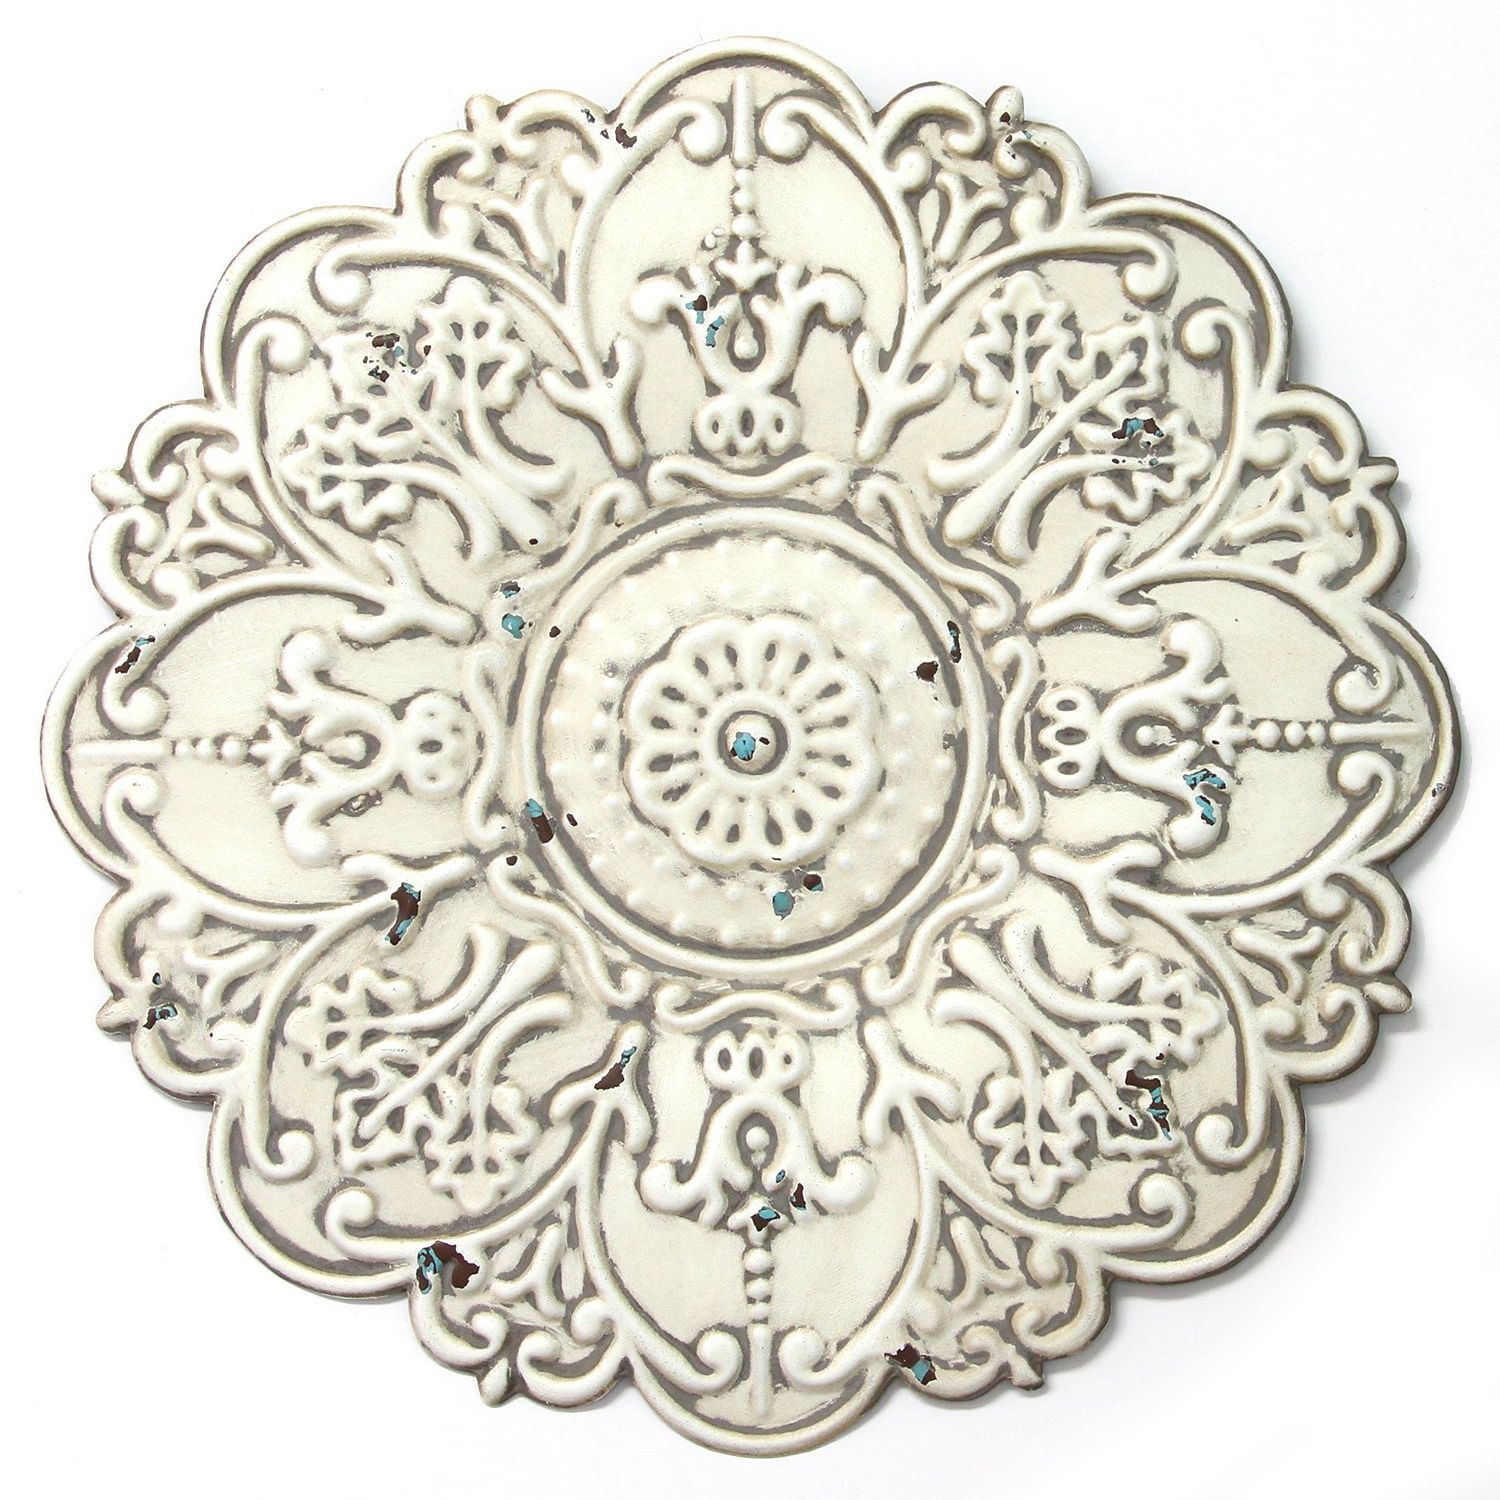 Widely Used Amazon: Stratton Home Décor S11563 Small Medallion Wall Décor Within Small Medallion Wall Decor (View 1 of 20)